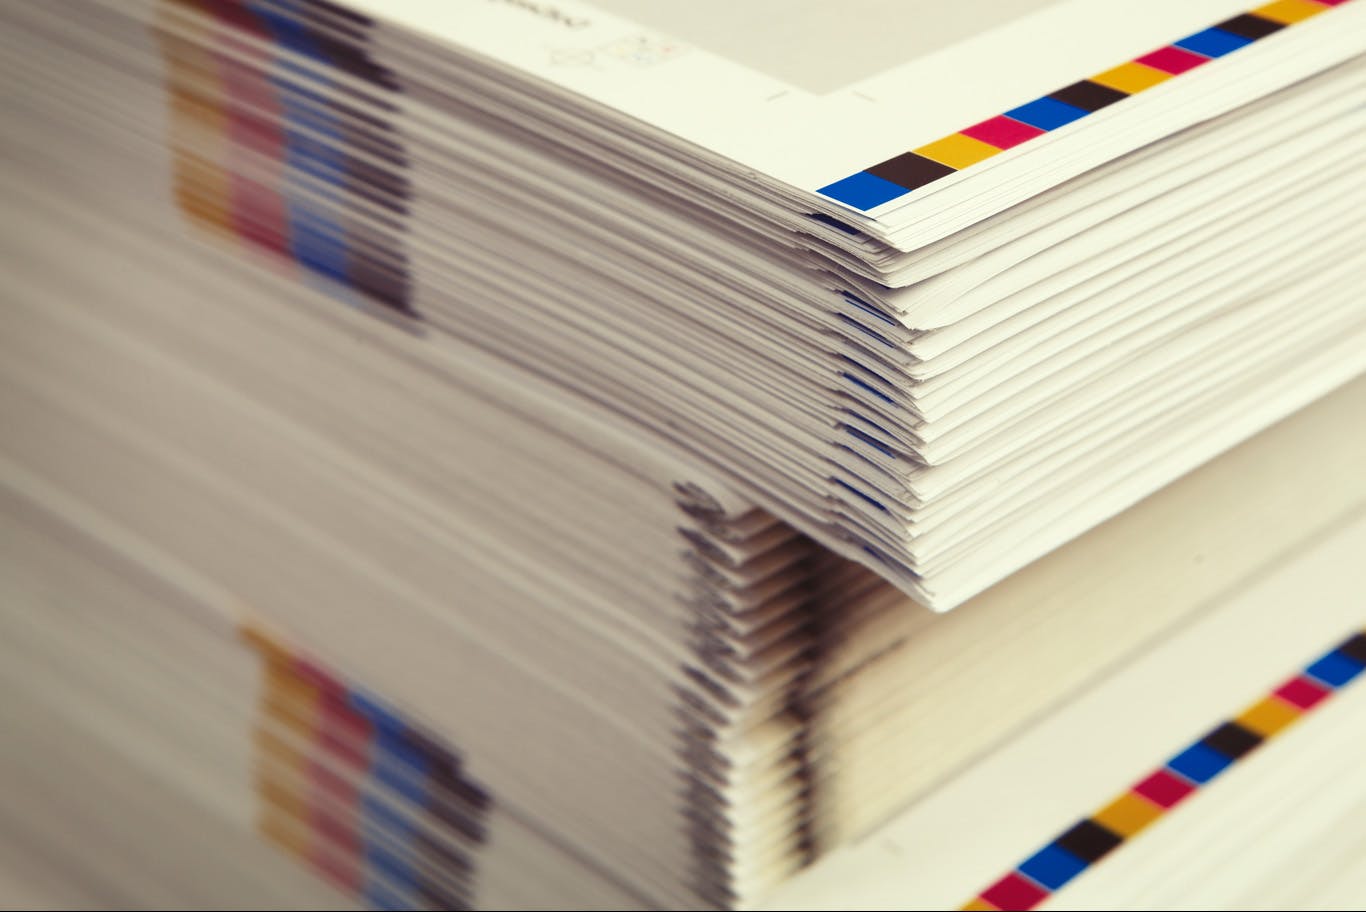 Printed documents with color marks